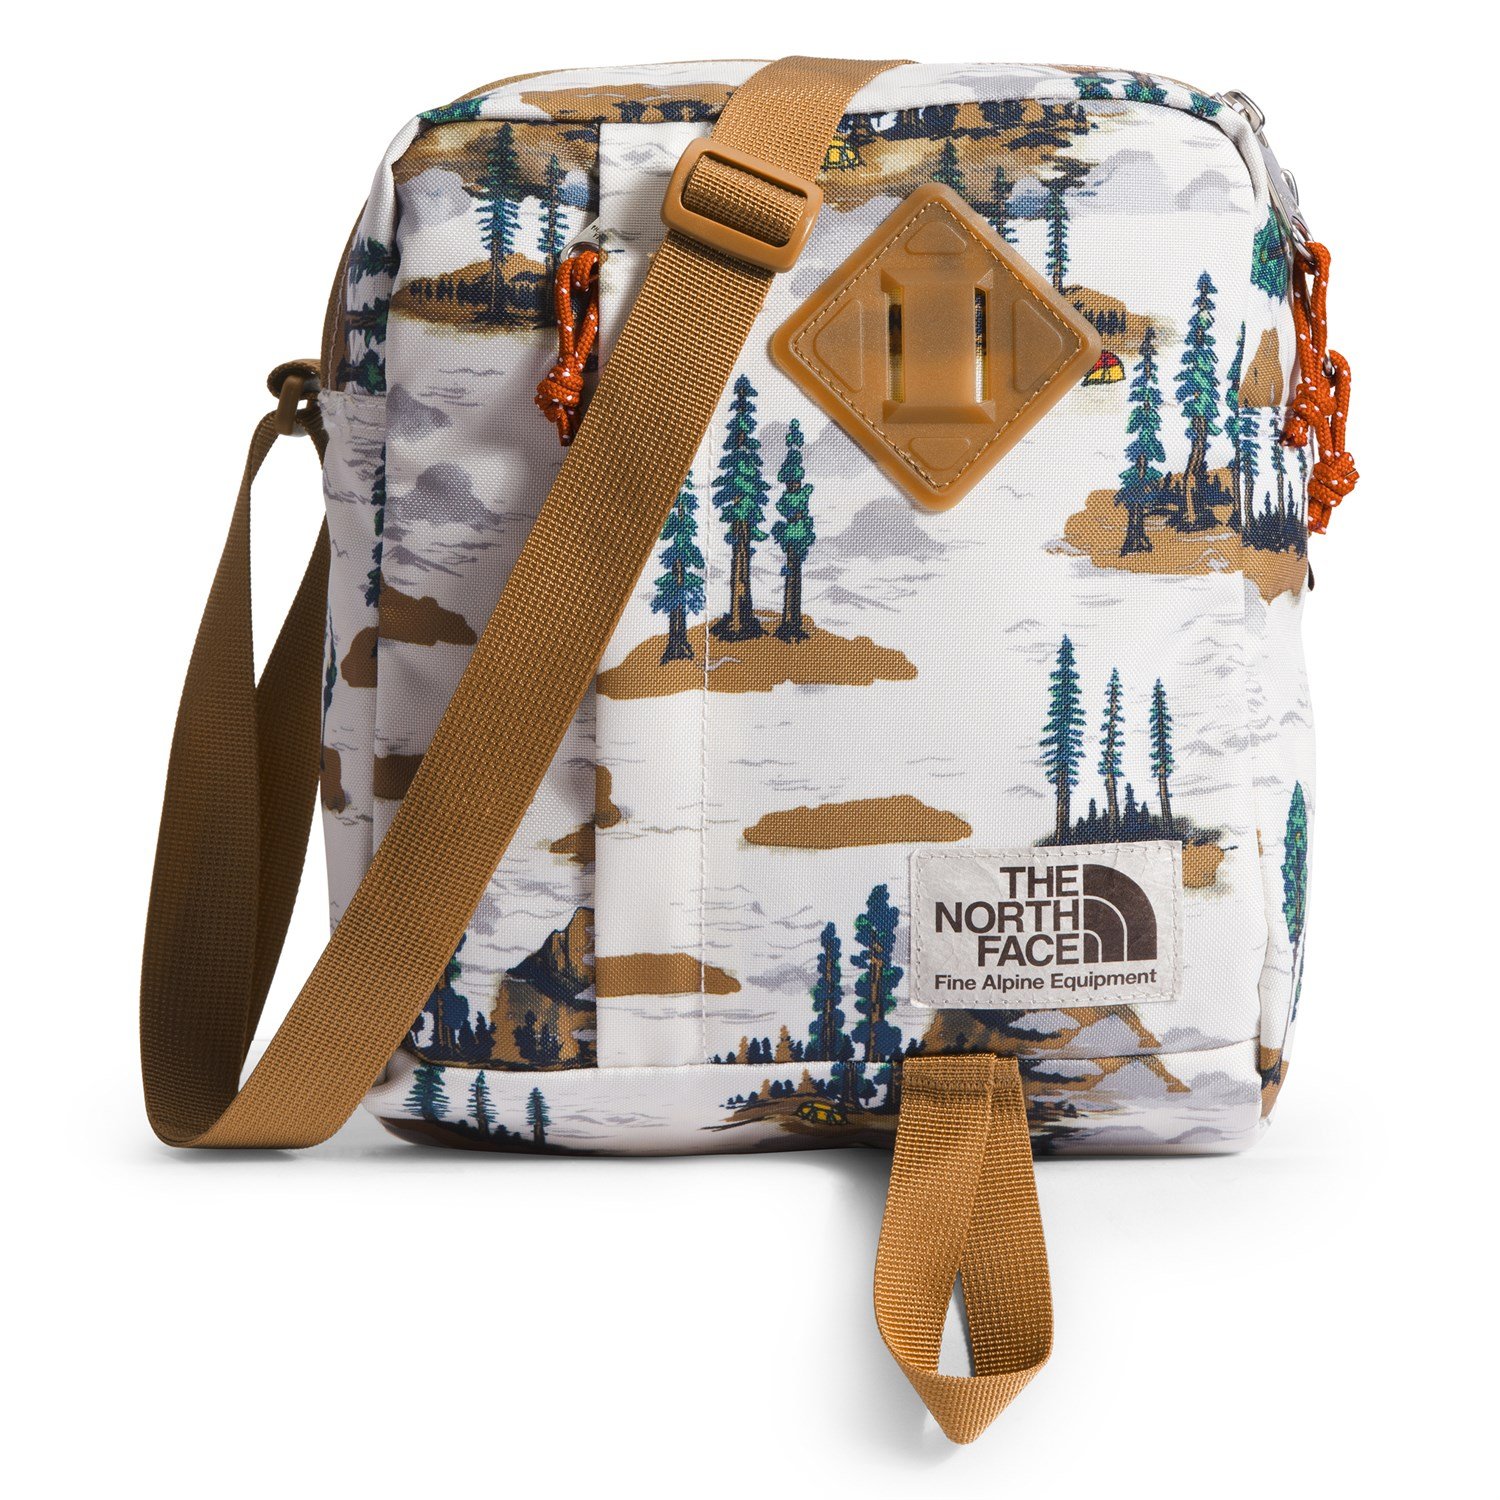 Nuptse Tote | The North Face | Tote bags for school, Bags, Tote